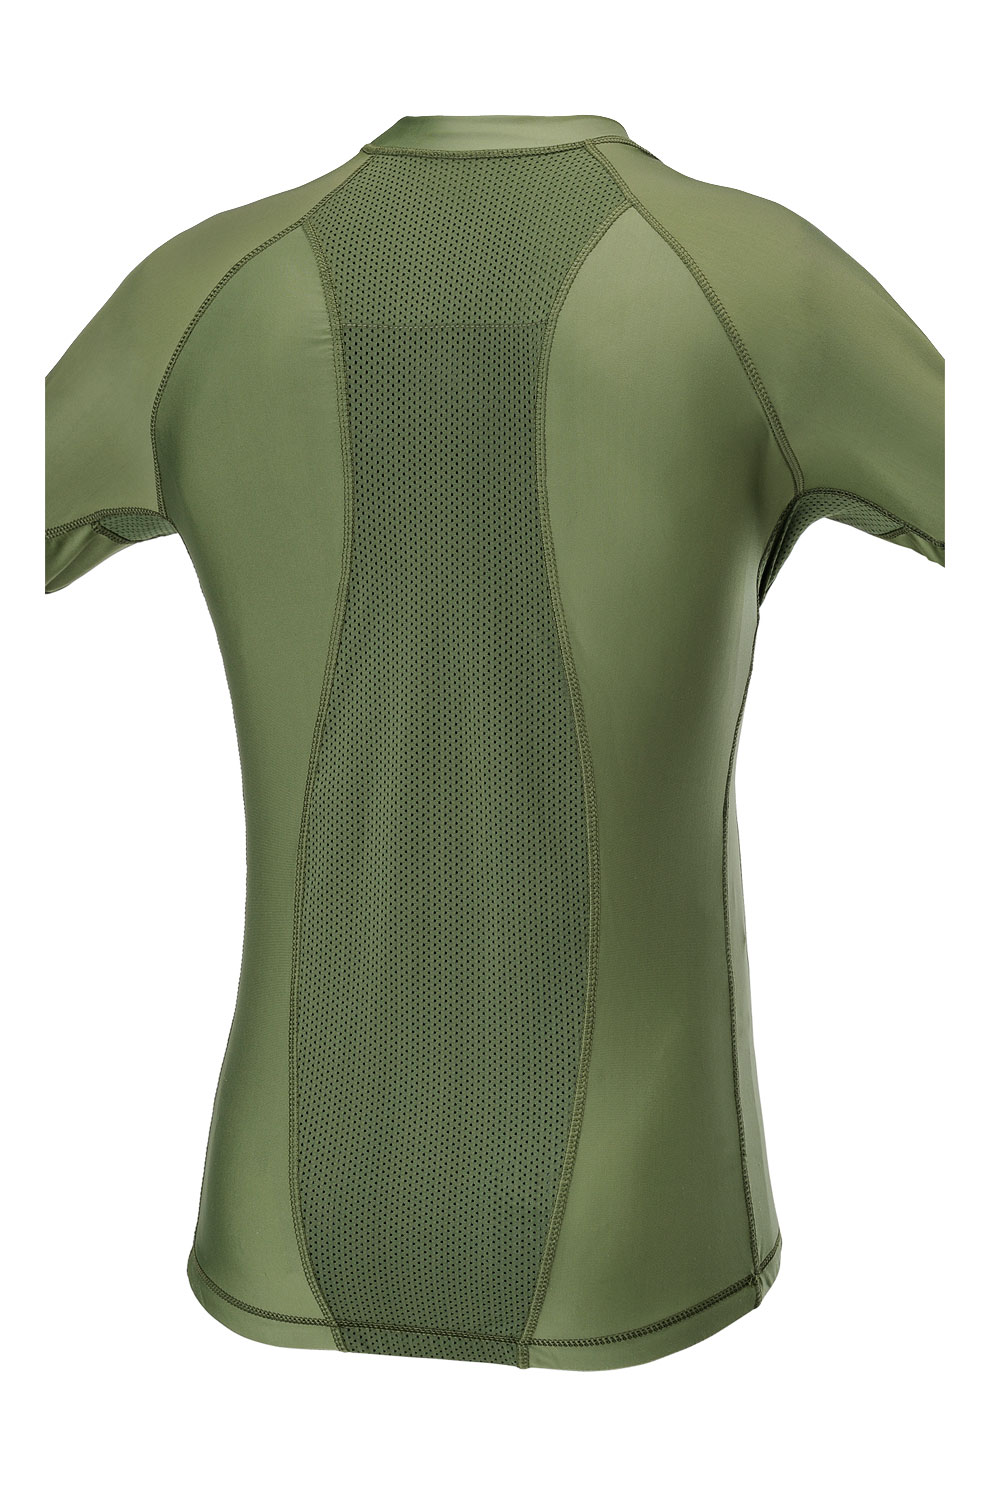 DEFCON 5 TG M Maglia Termica A Maniche Lunghe Verde D5-1788 OD Tactical Thermal Shirt Long Sleeves 